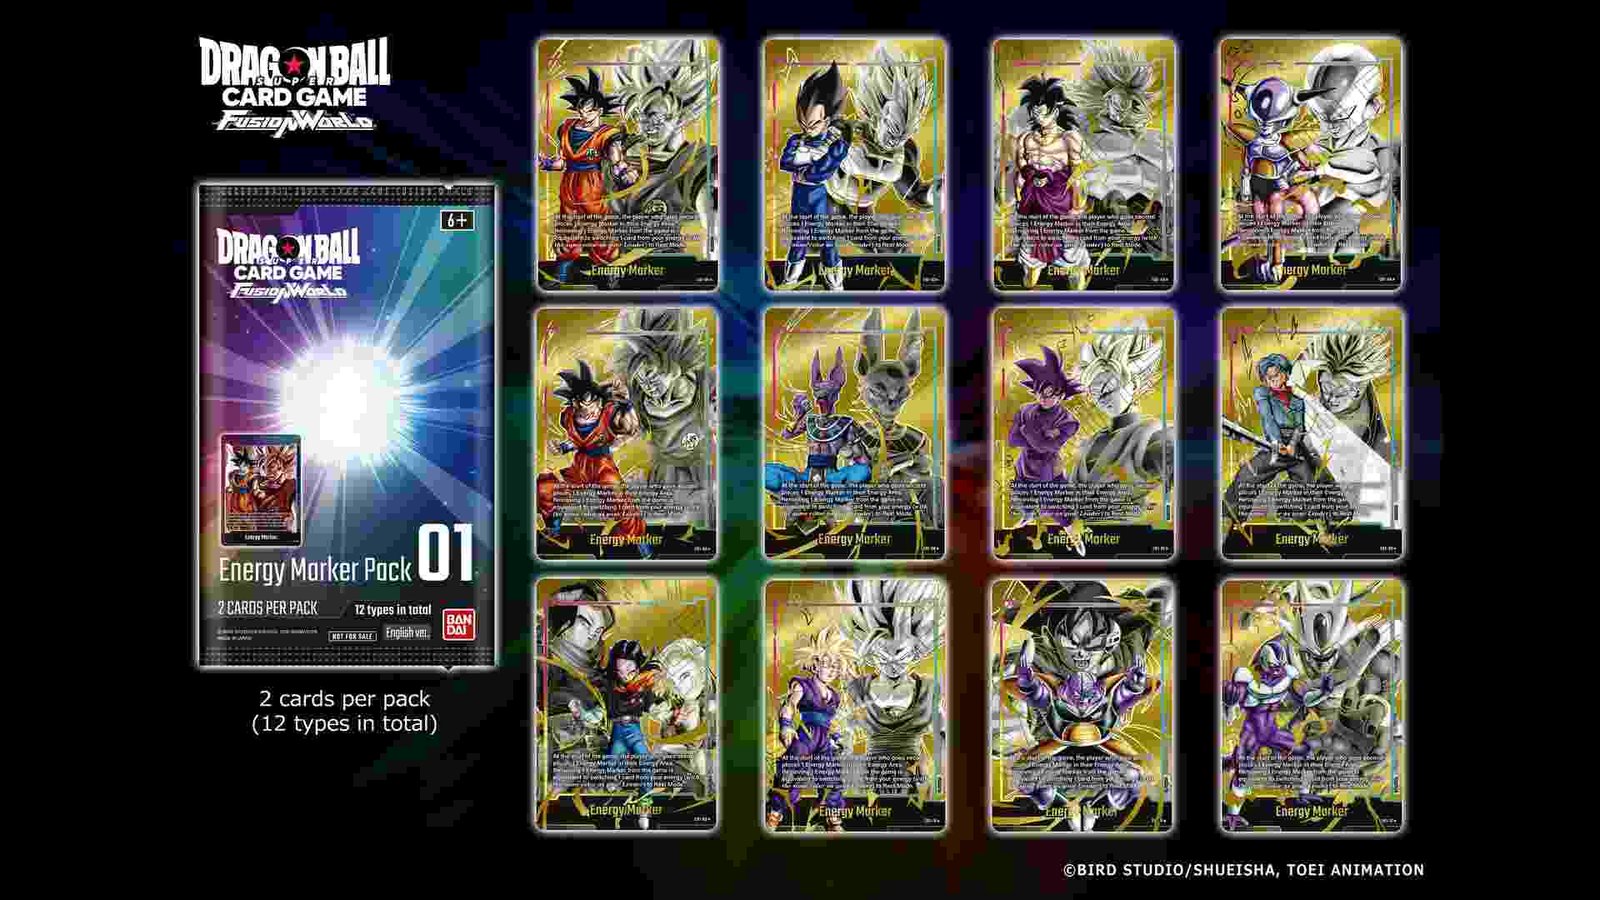 Is there a Dragon Ball Super Card Game Fusion World Android Mobile, iOS devices & Steam Deck Release Date?